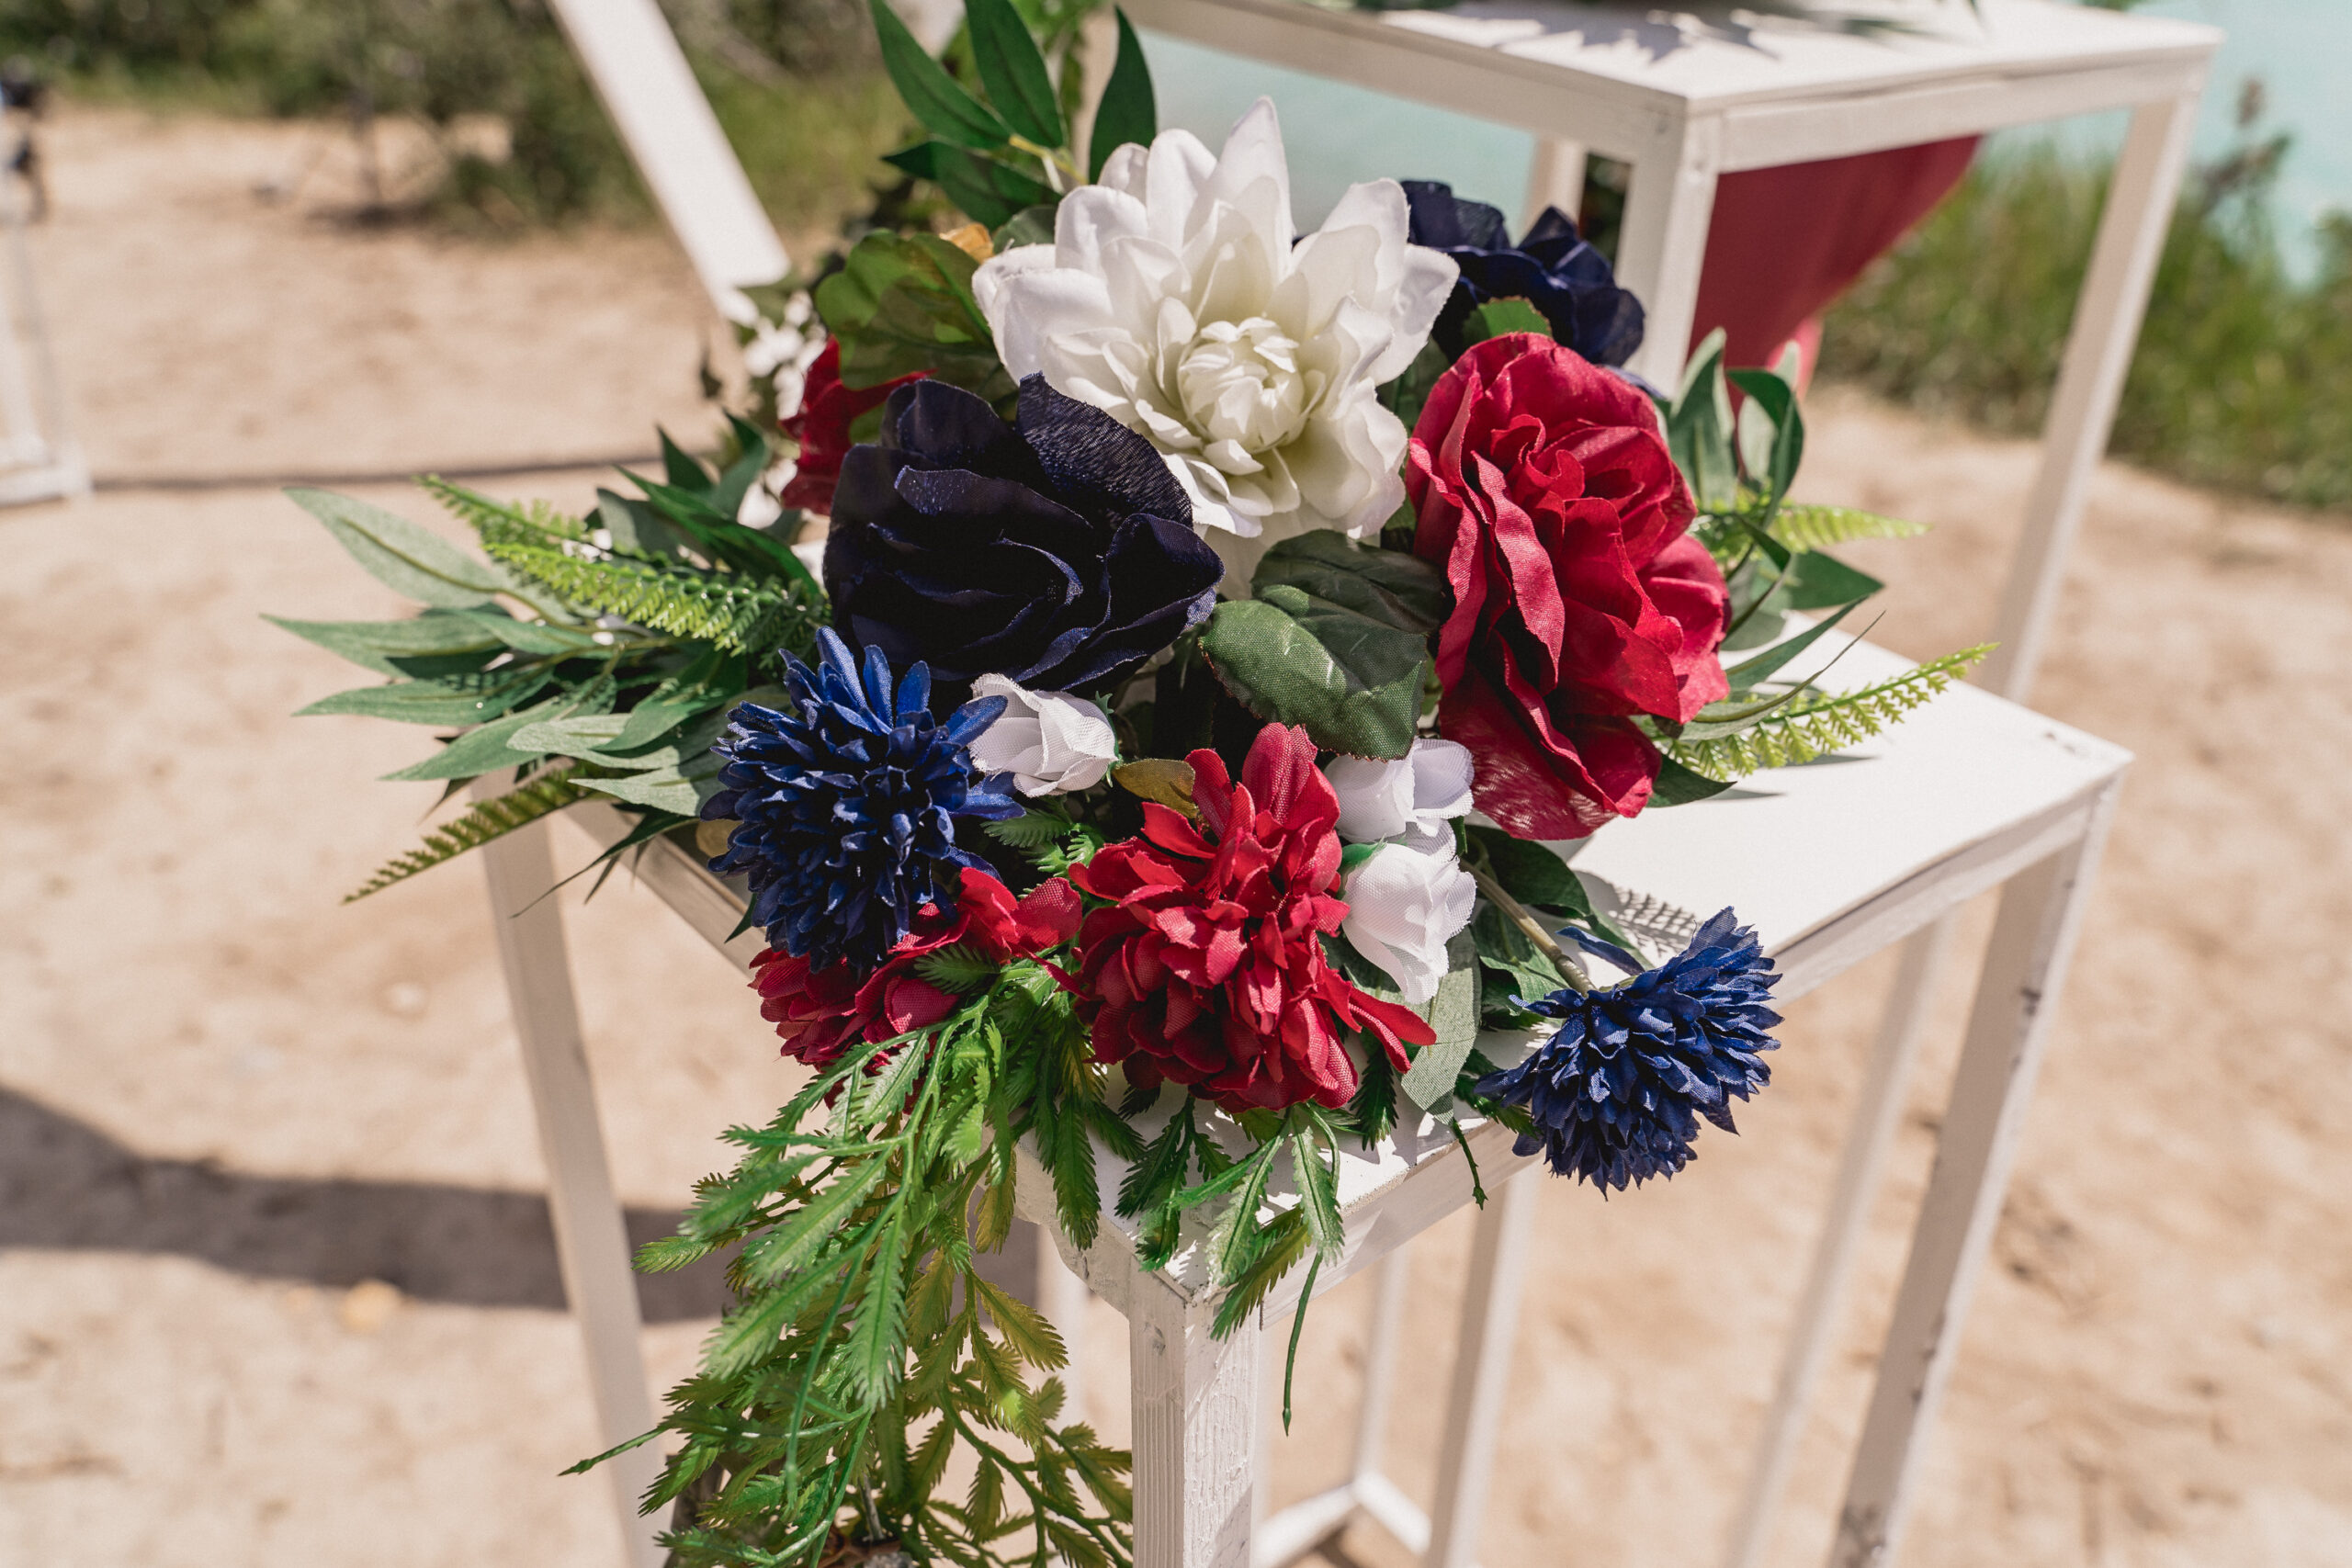 Wedding ceremony decor with red flowers and cobalt blue flowers